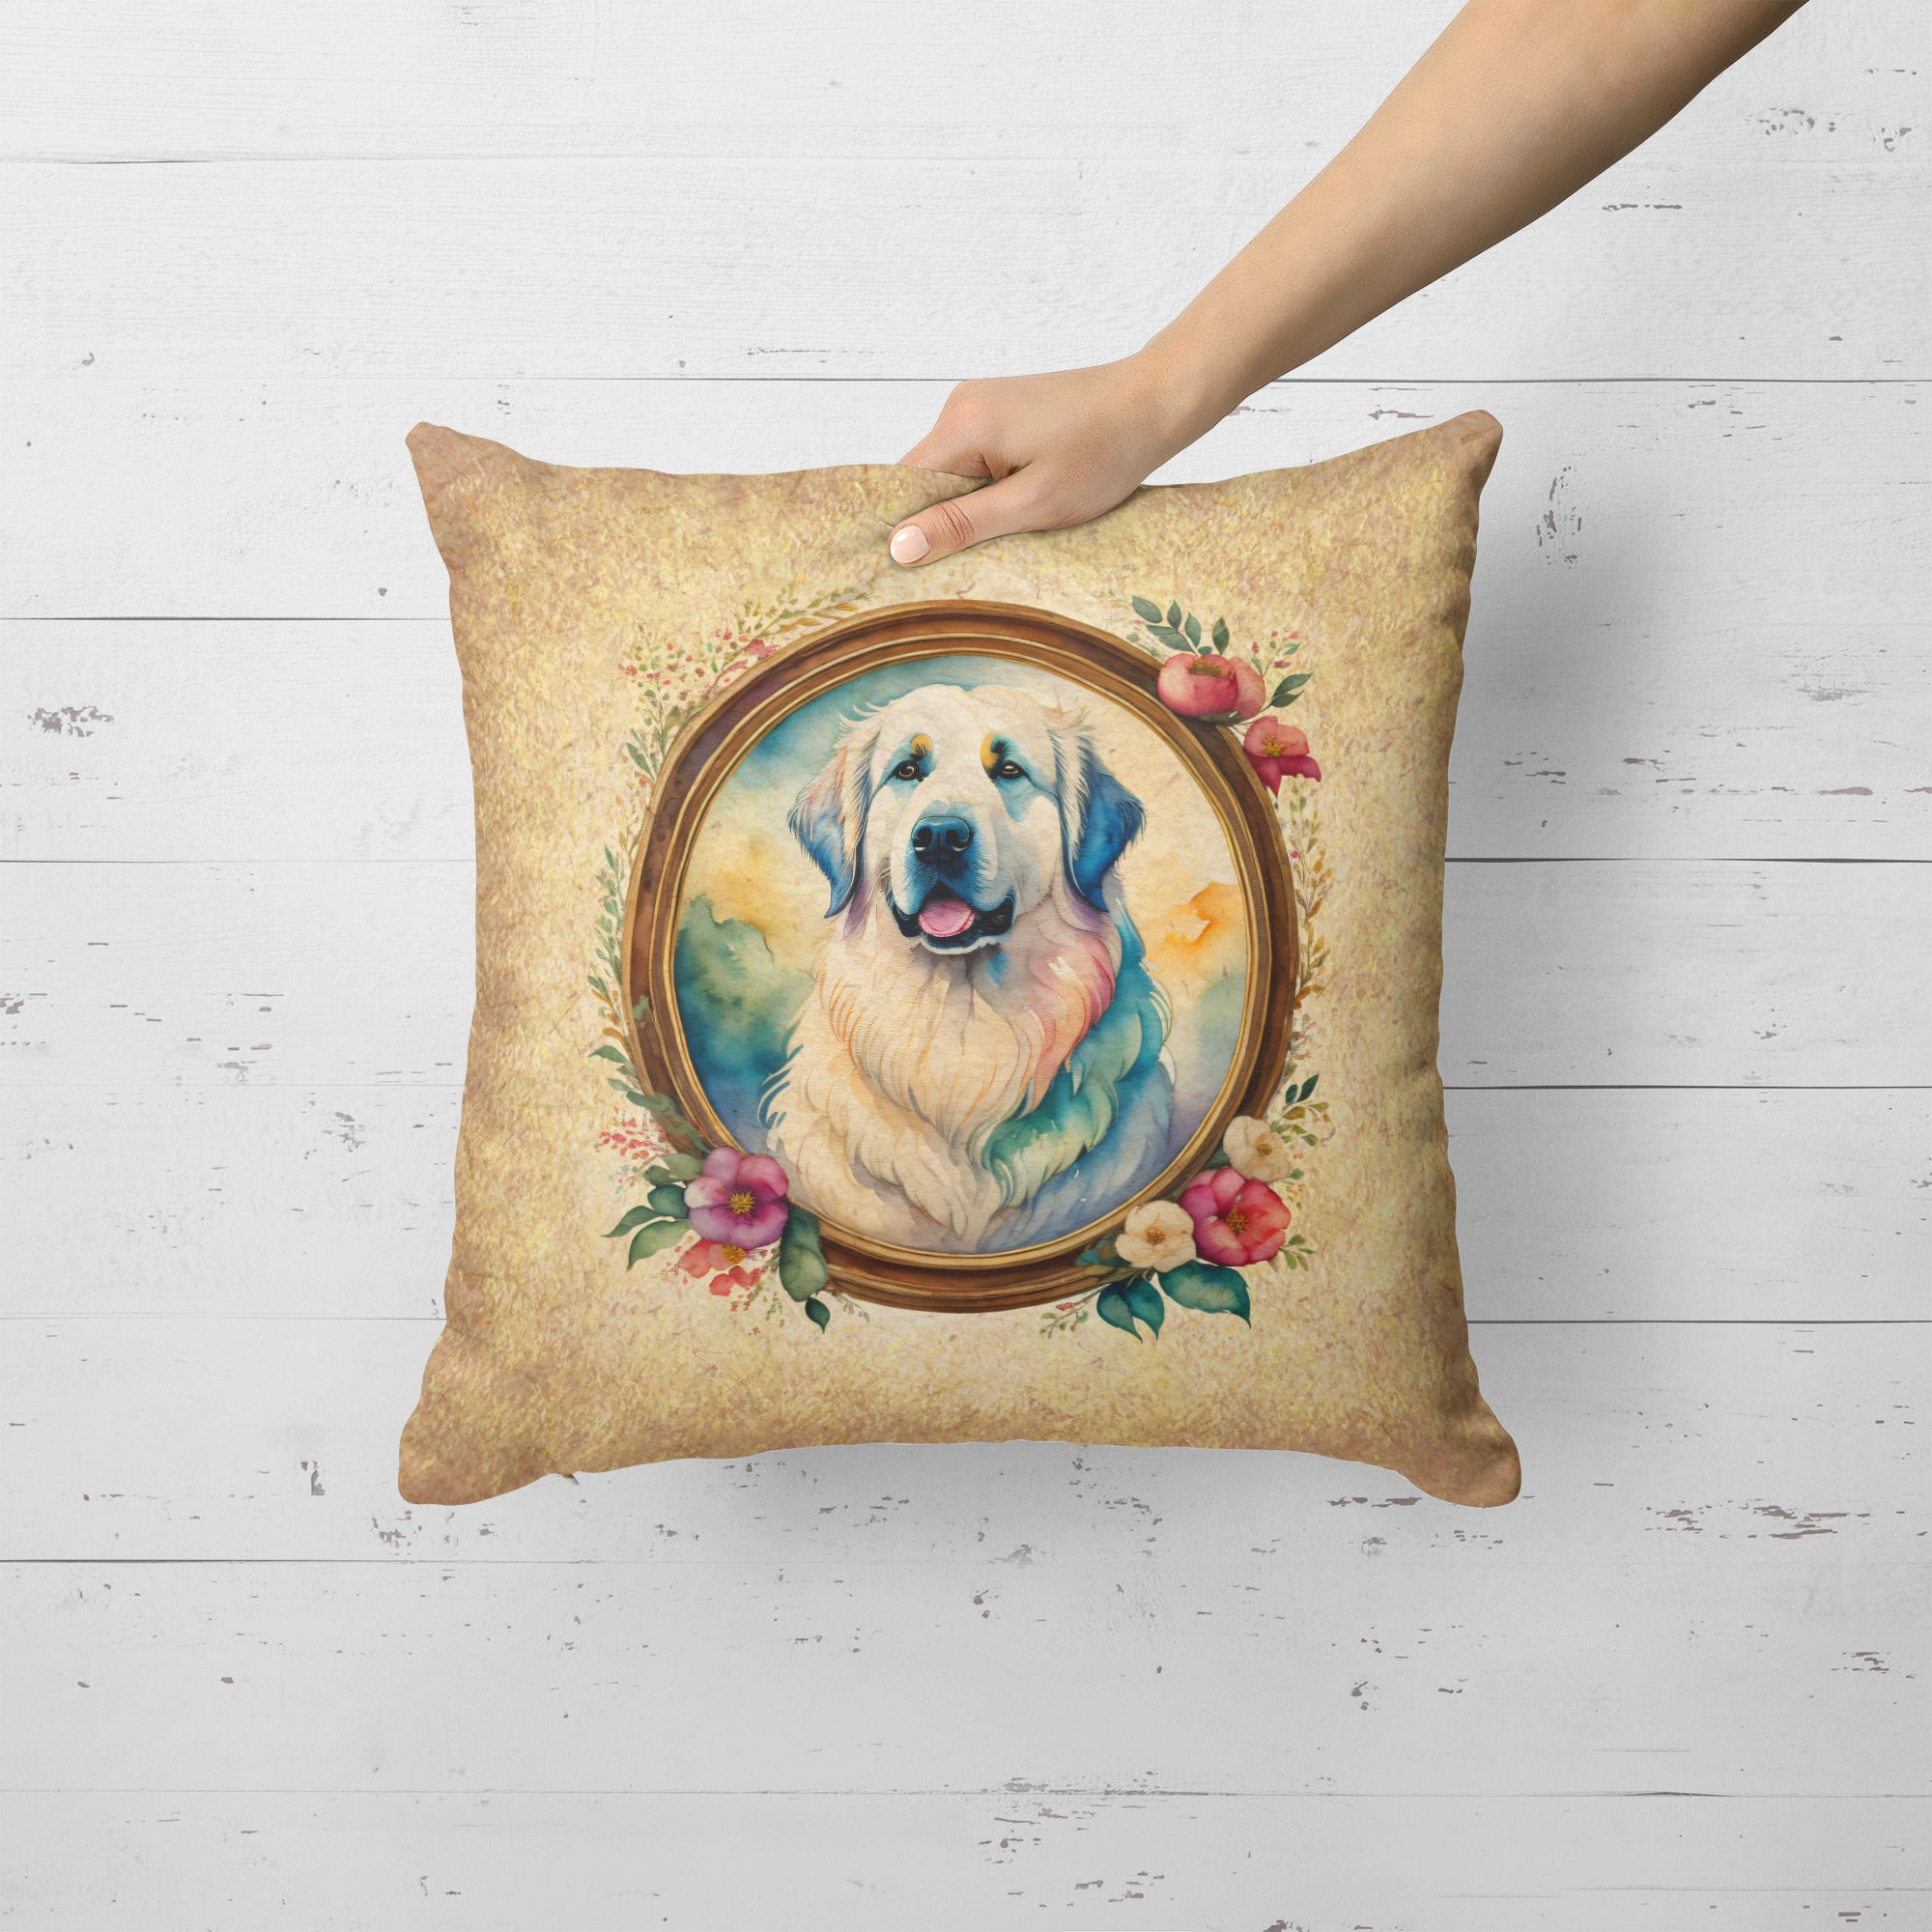 Buy this Great Pyrenees and Flowers Fabric Decorative Pillow